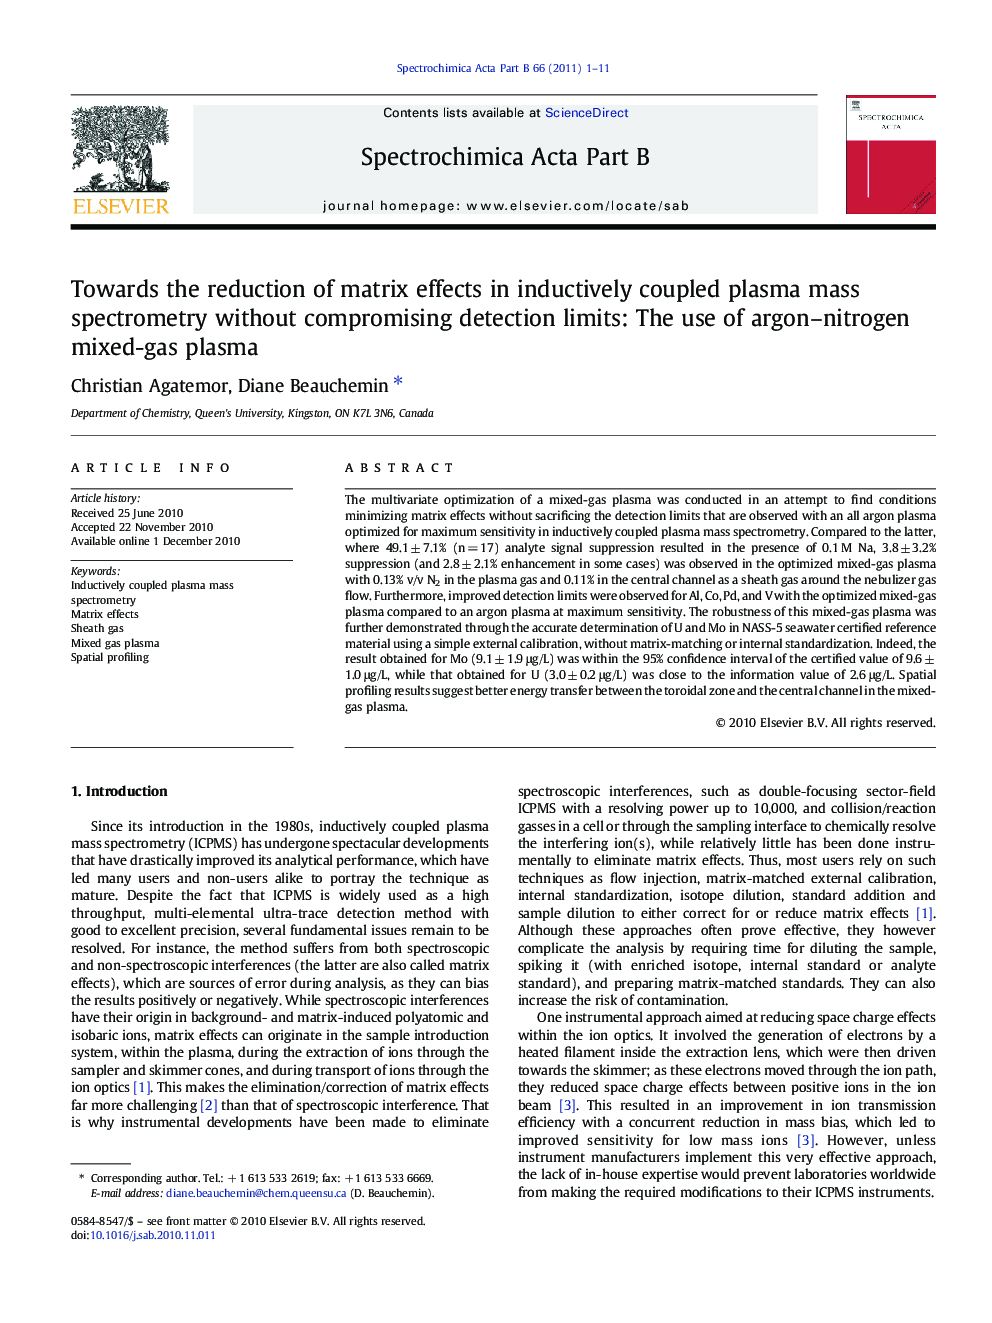 Towards the reduction of matrix effects in inductively coupled plasma mass spectrometry without compromising detection limits: The use of argon–nitrogen mixed-gas plasma